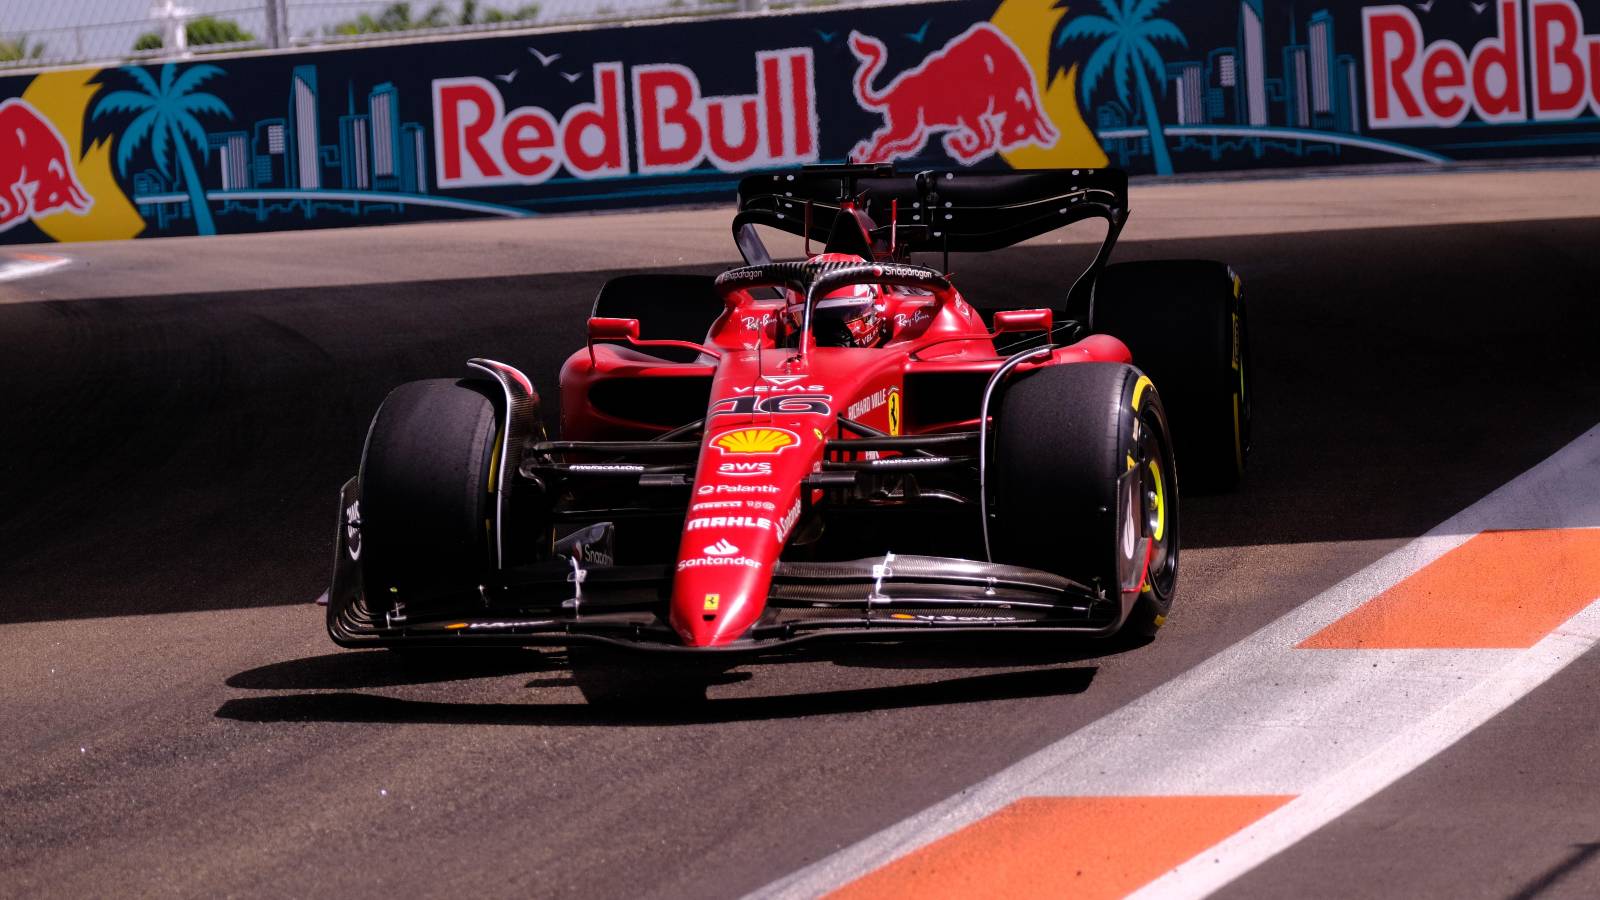 Charles Leclerc, Ferrari, in action. United States, May 2022.